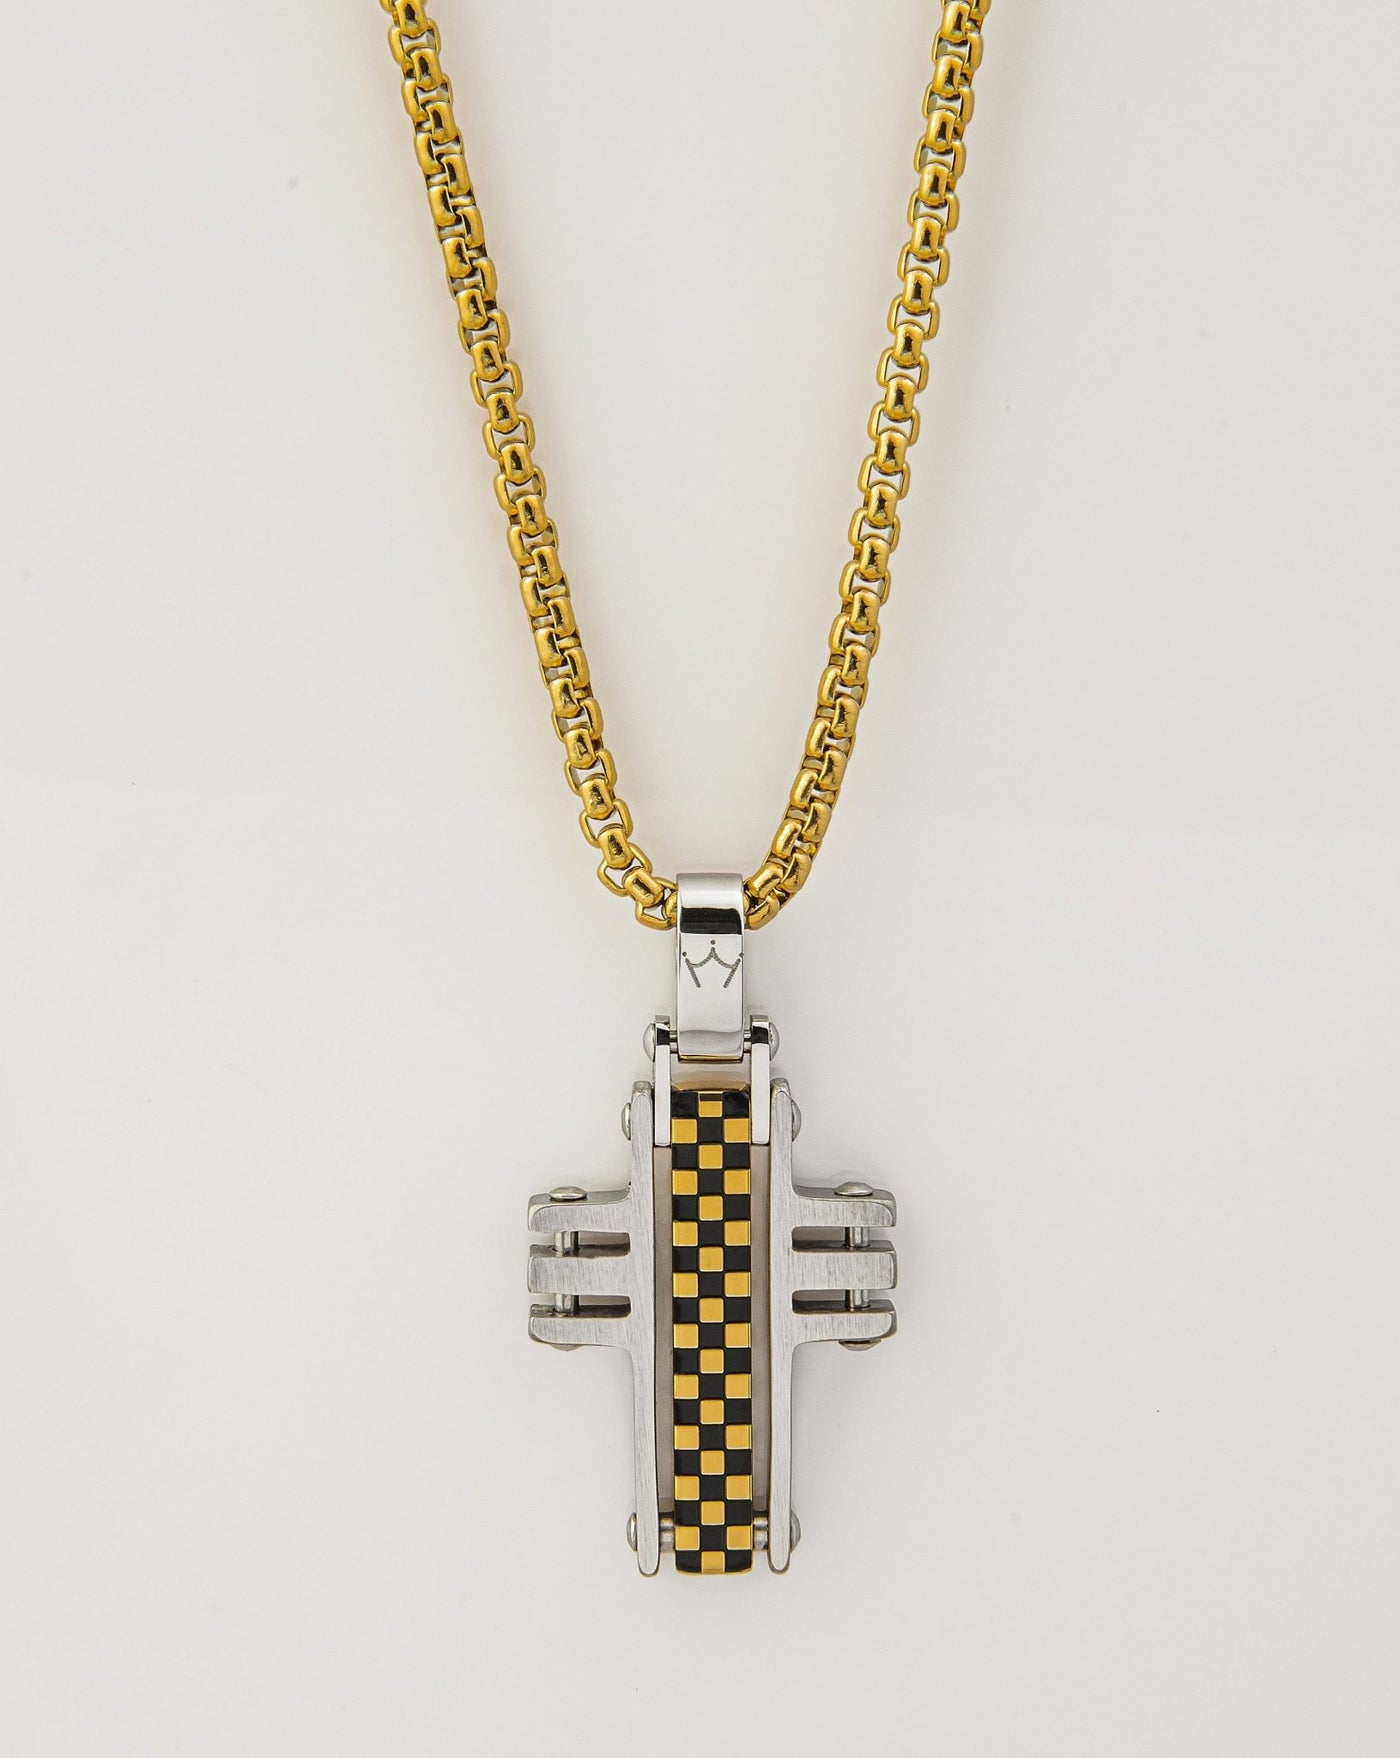 Race Necklace - Tomell London